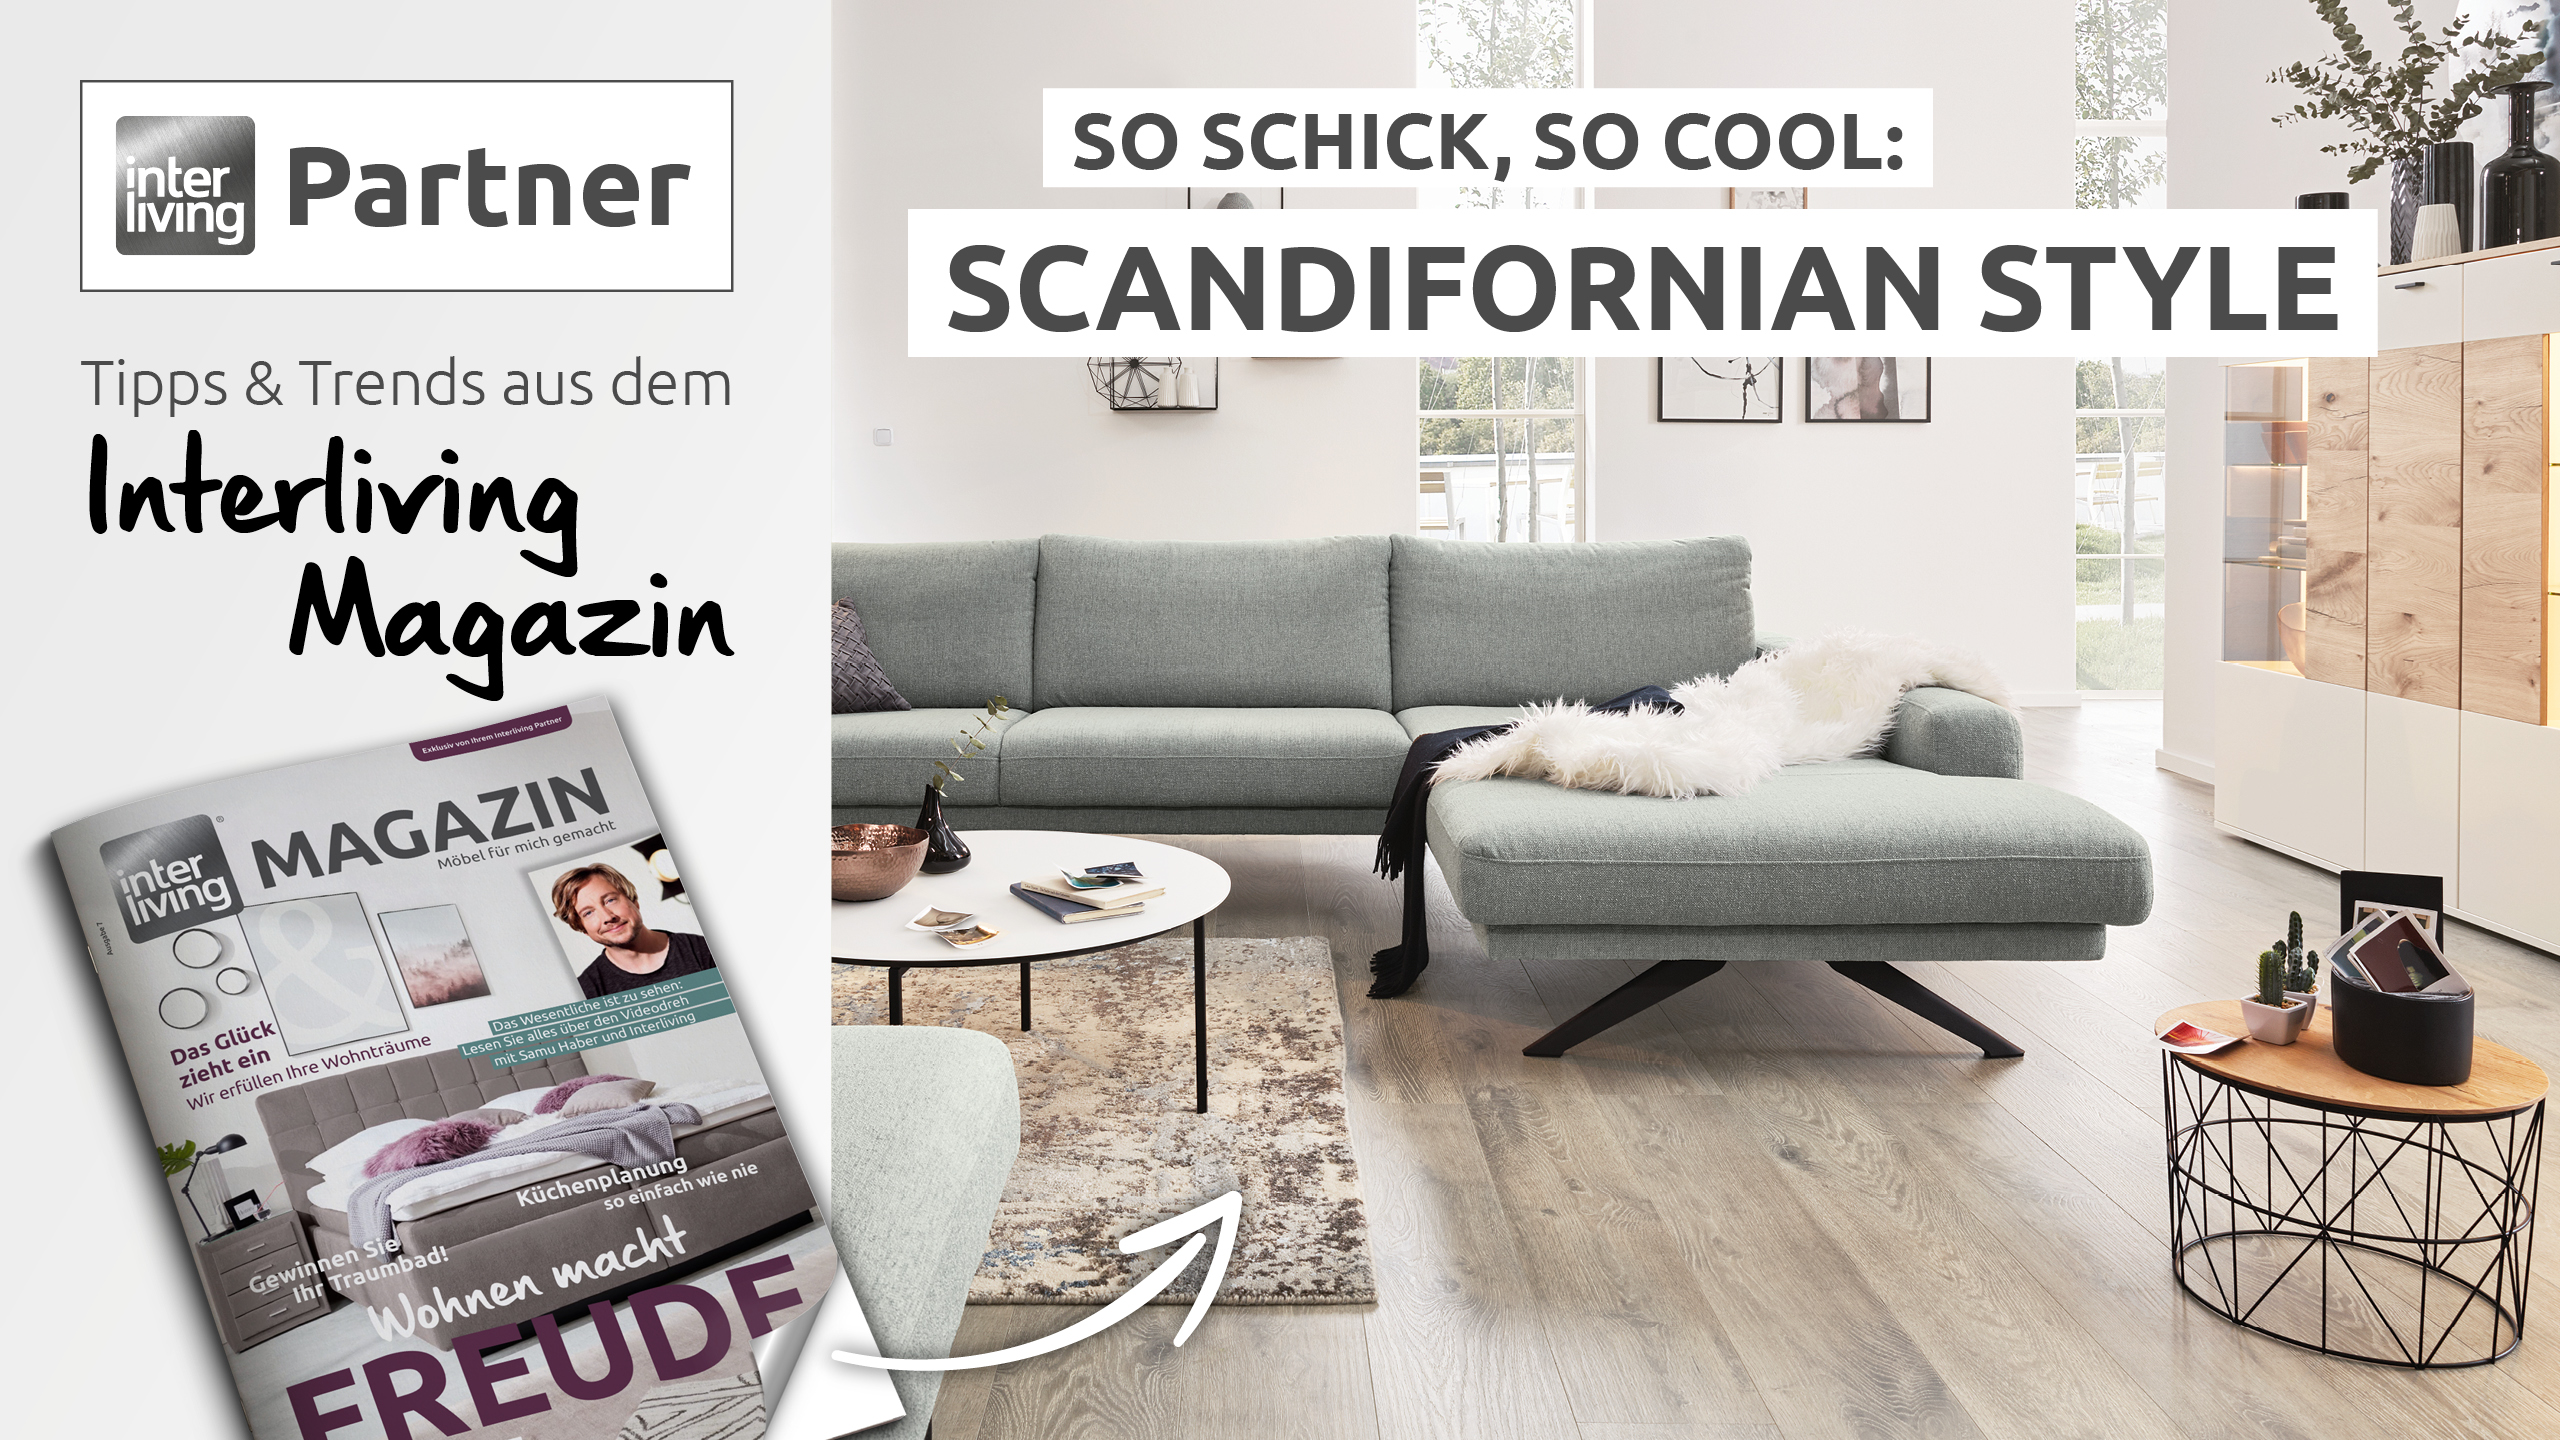 So schick, so cool – Scandifornian Style!